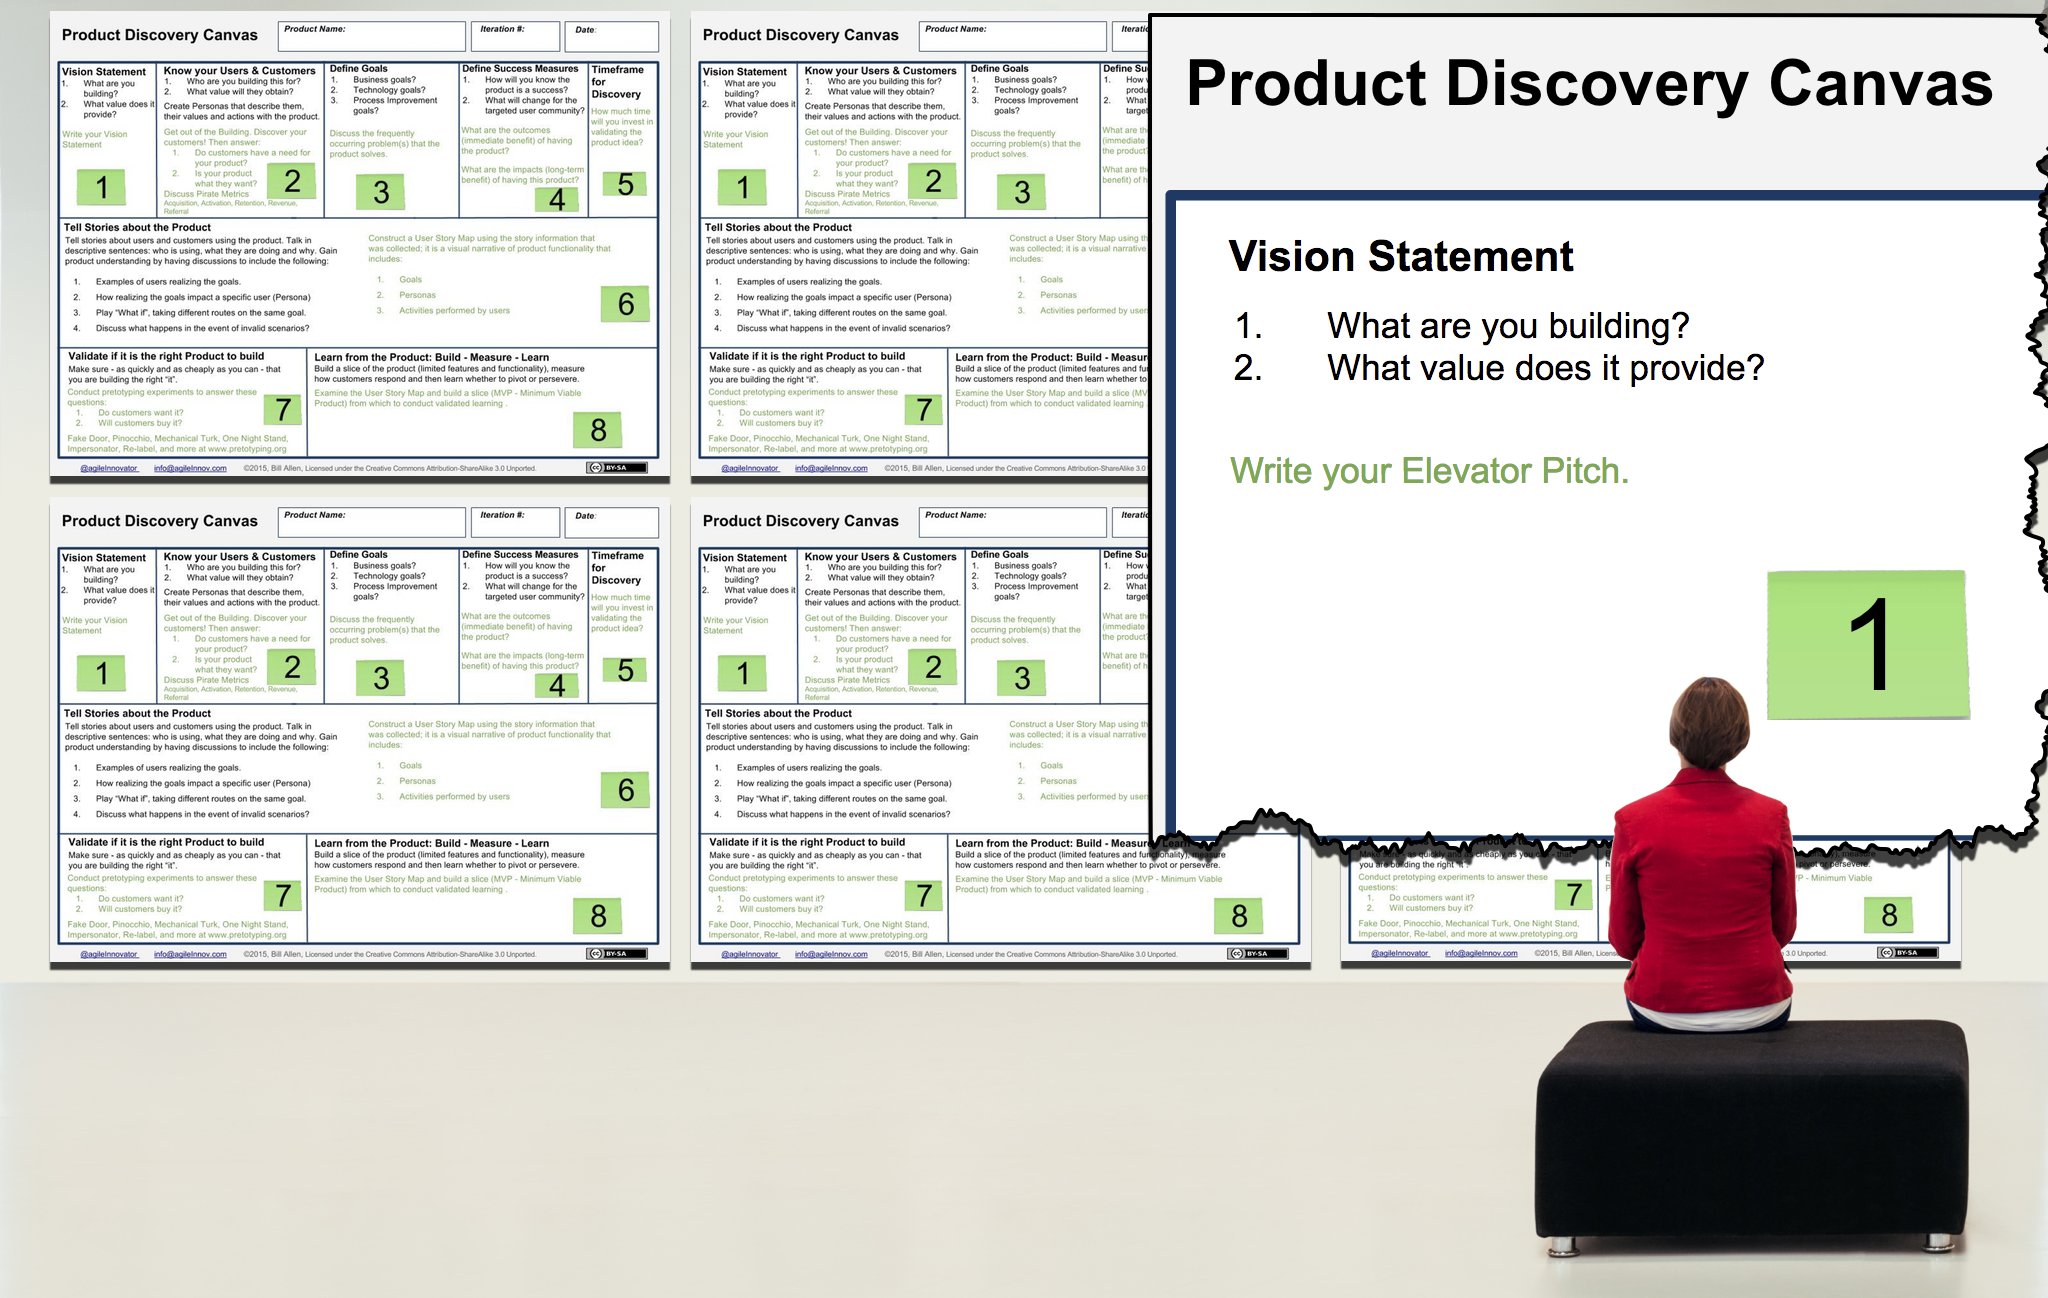 Using the Product Discovery Canvas, Part 2 Vision Statement (Elevator